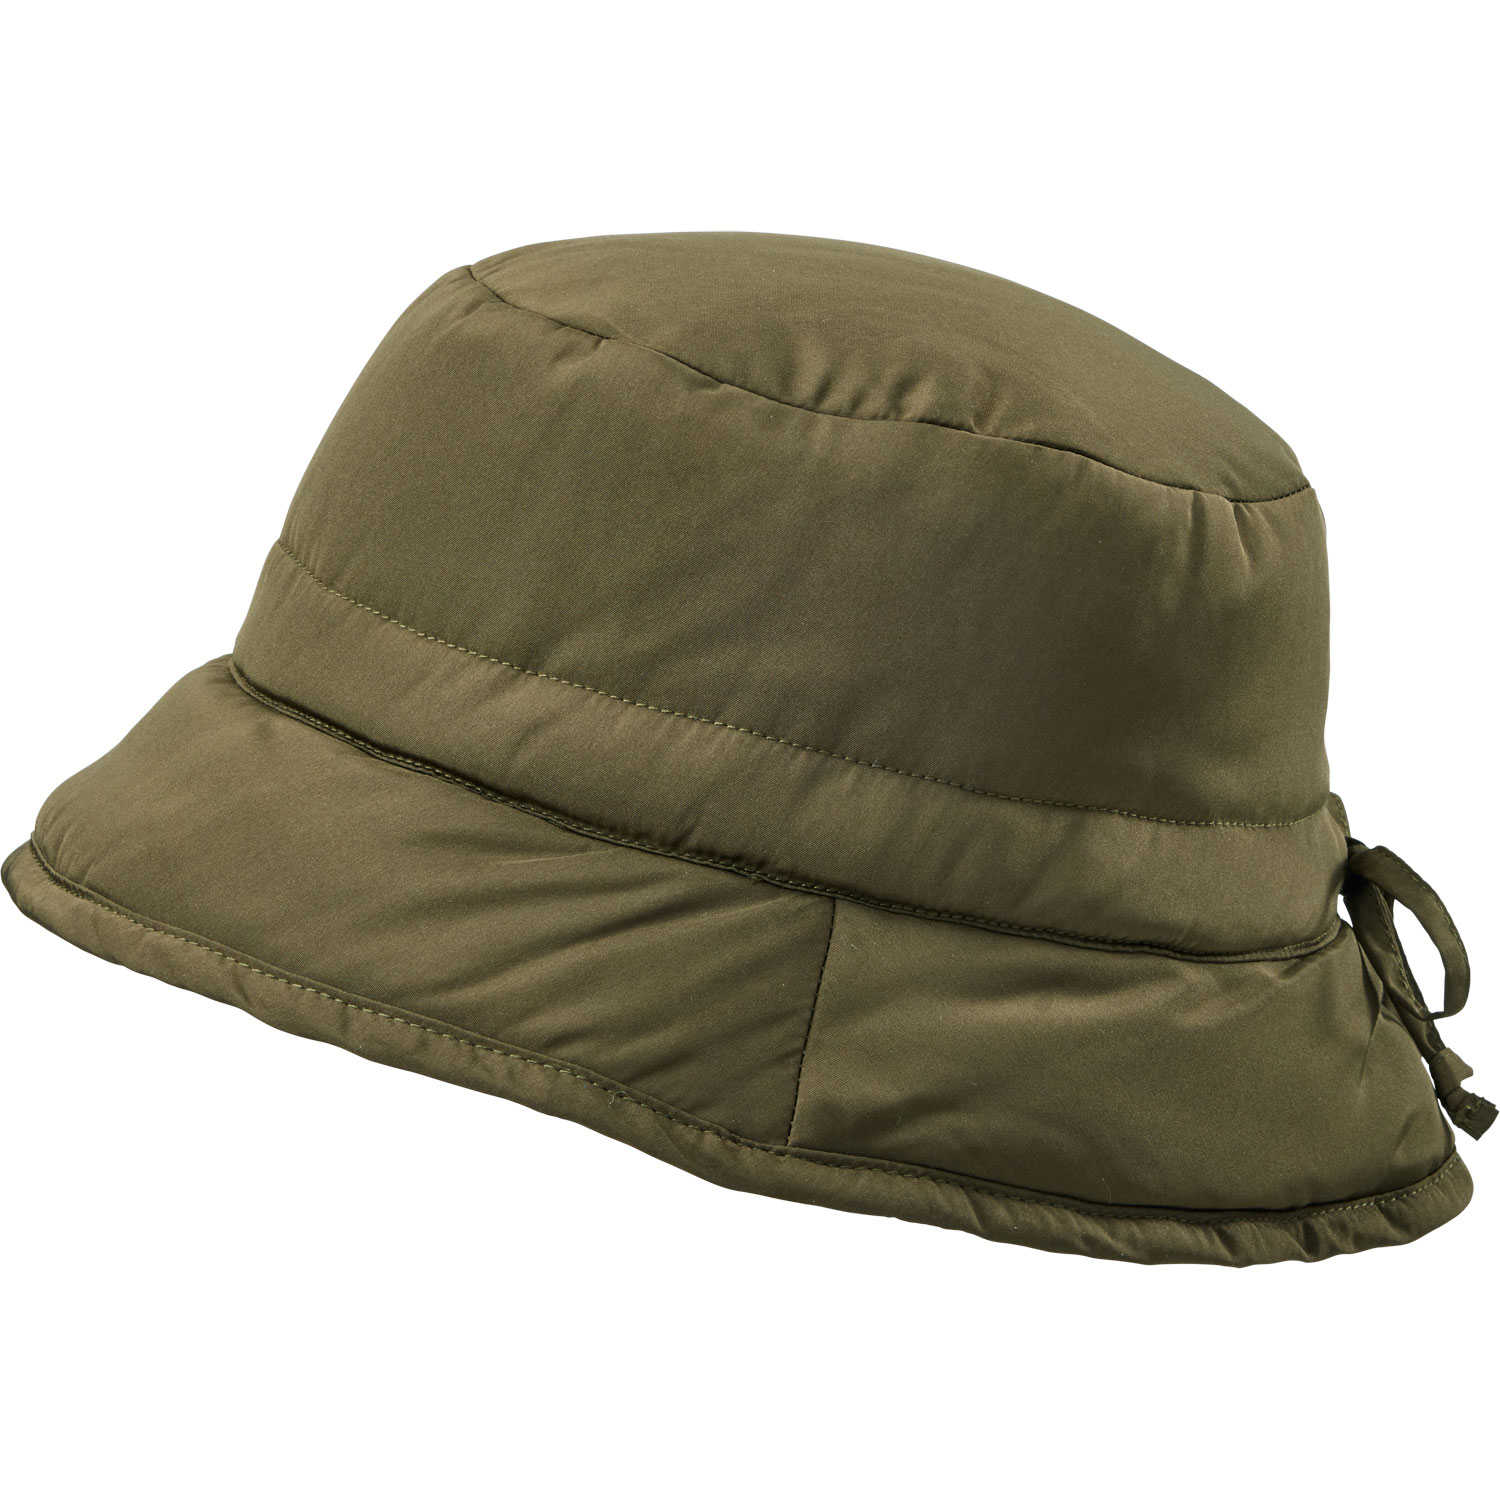 Women's Insulated Adjustable Bucket Hat - Green - L/XL - Duluth Trading Company